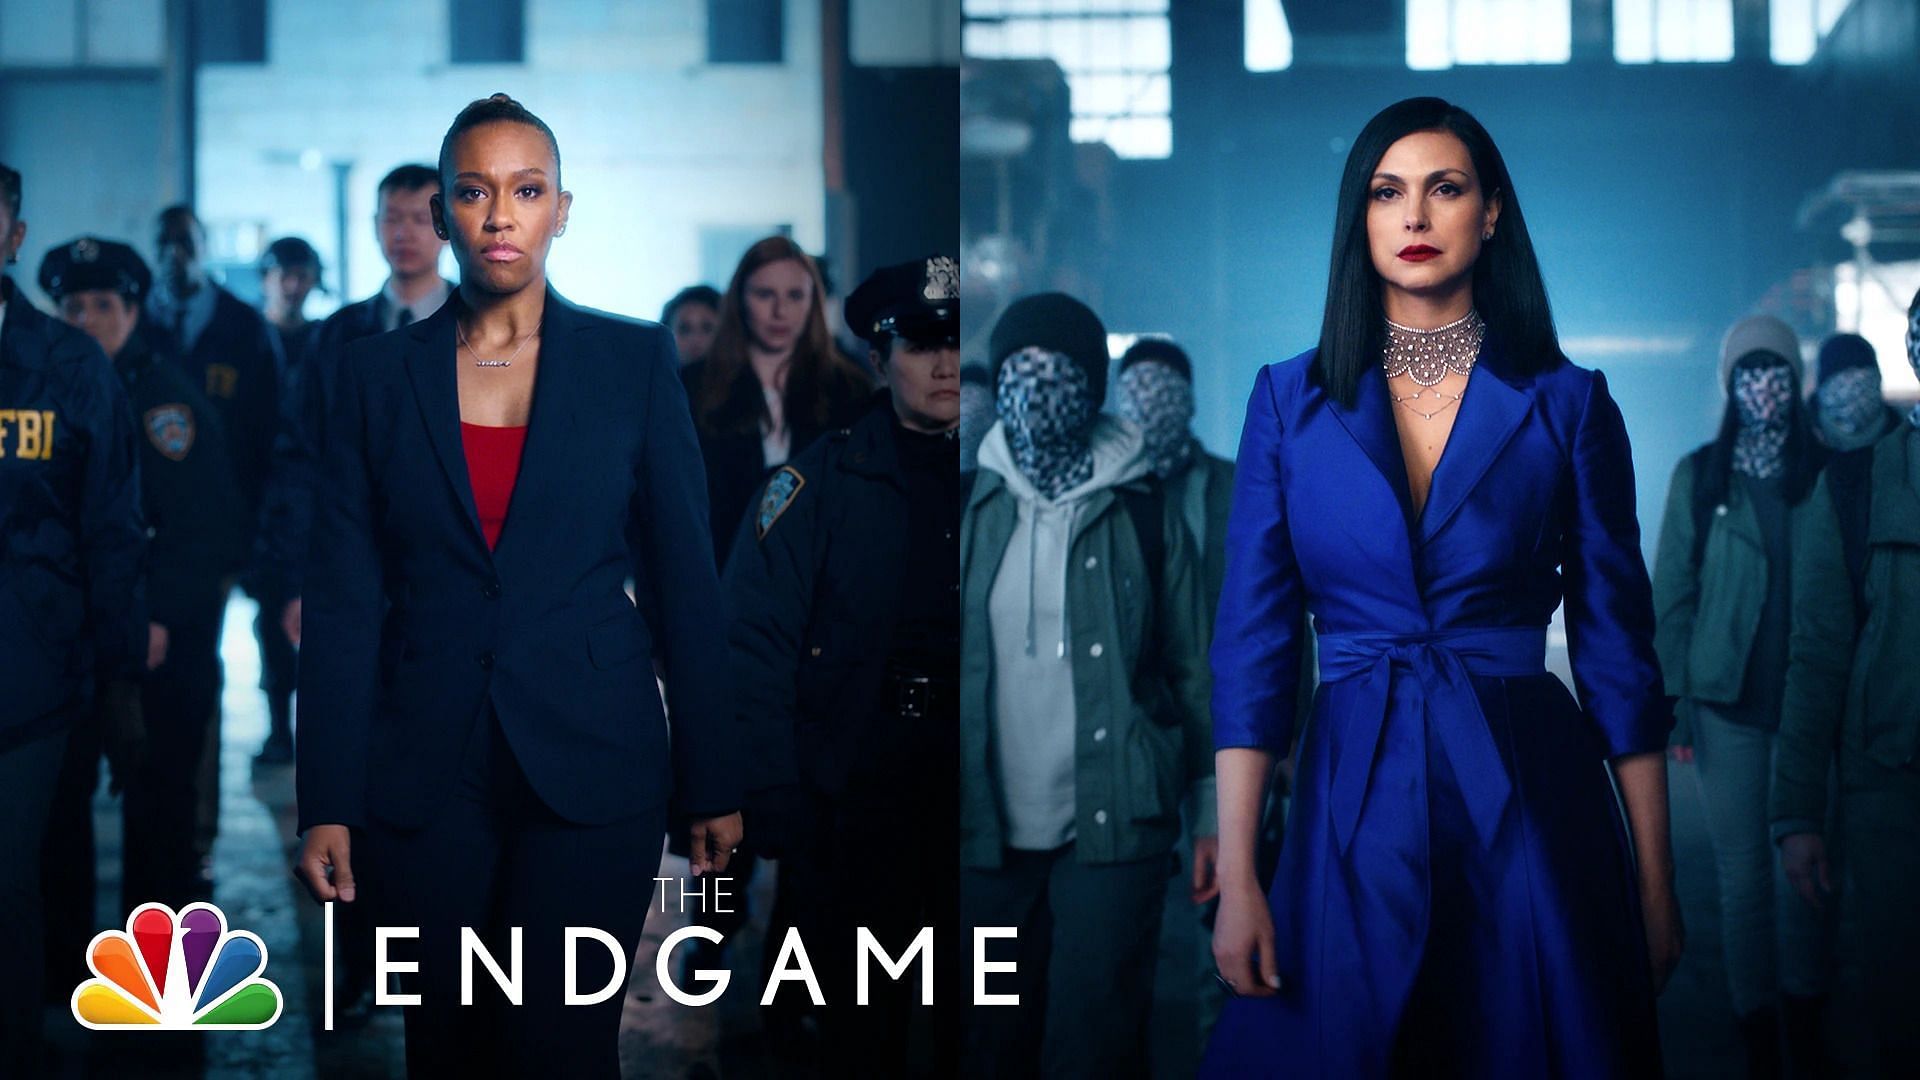 The Endgame episode 1 cast - Who stars in the NBC series?